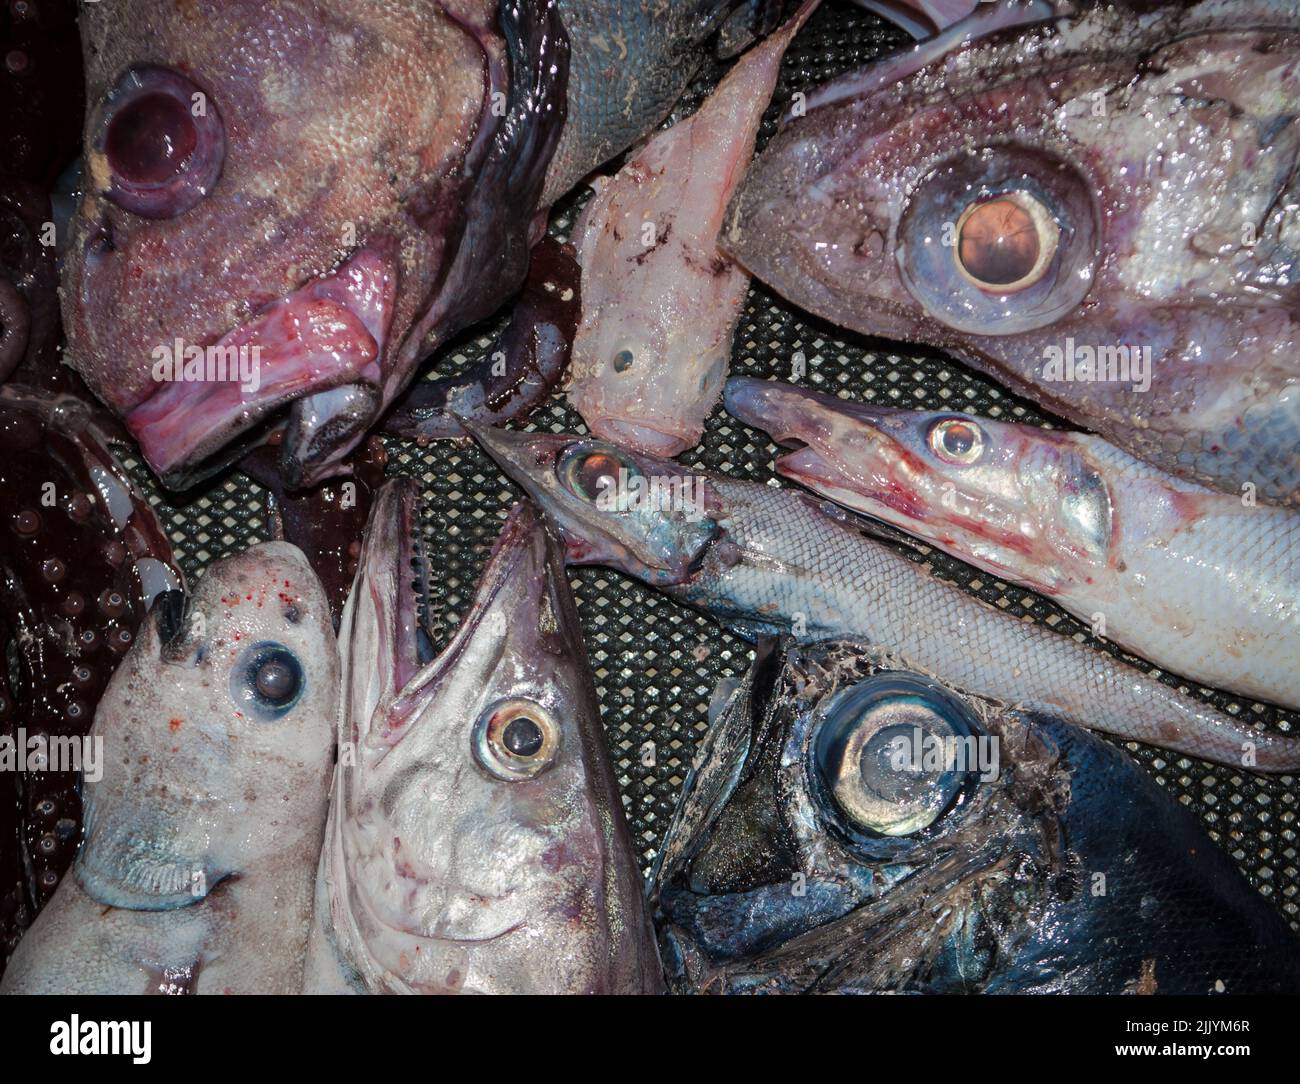 A Look at life in New Zealand: Freshly landed catch from a deep-sea trawl. Some weird and unusual species. Black Discfish; Frogmouth; eels. Stock Photo